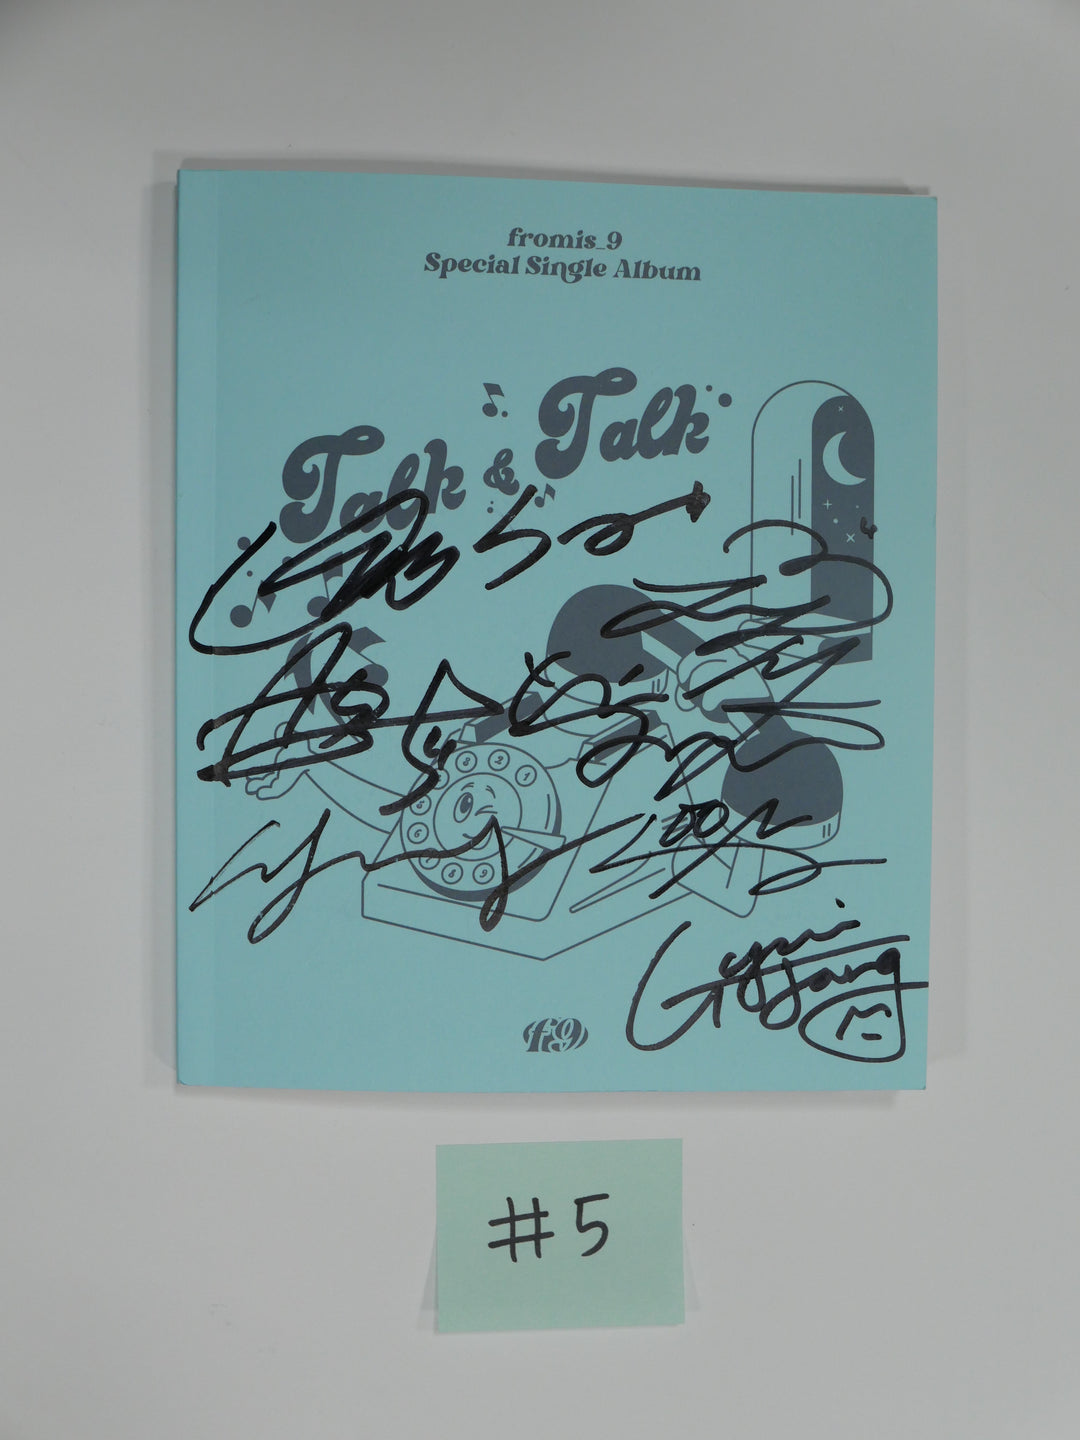 Fromis_9 "Talk & Talk" - Hand Autographed(Signed) promo Album